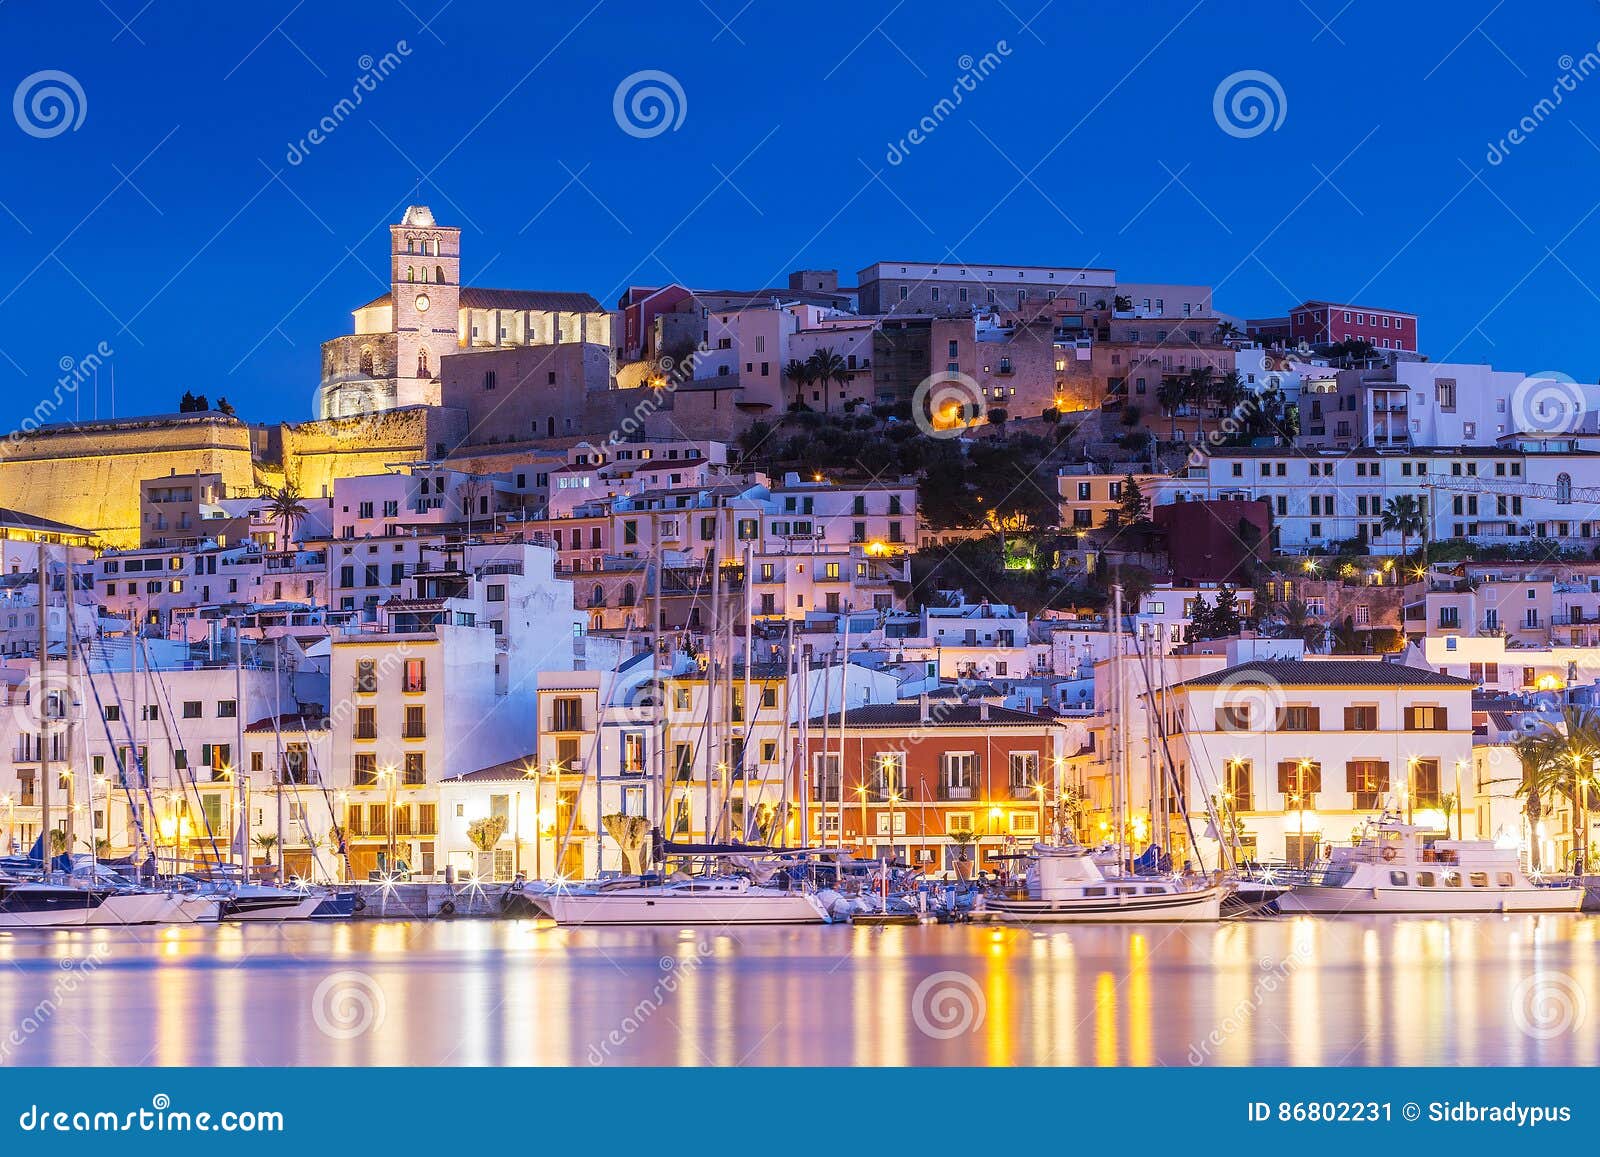 ibiza dalt vila downtown at night with light reflections in the water, ibiza, spain.